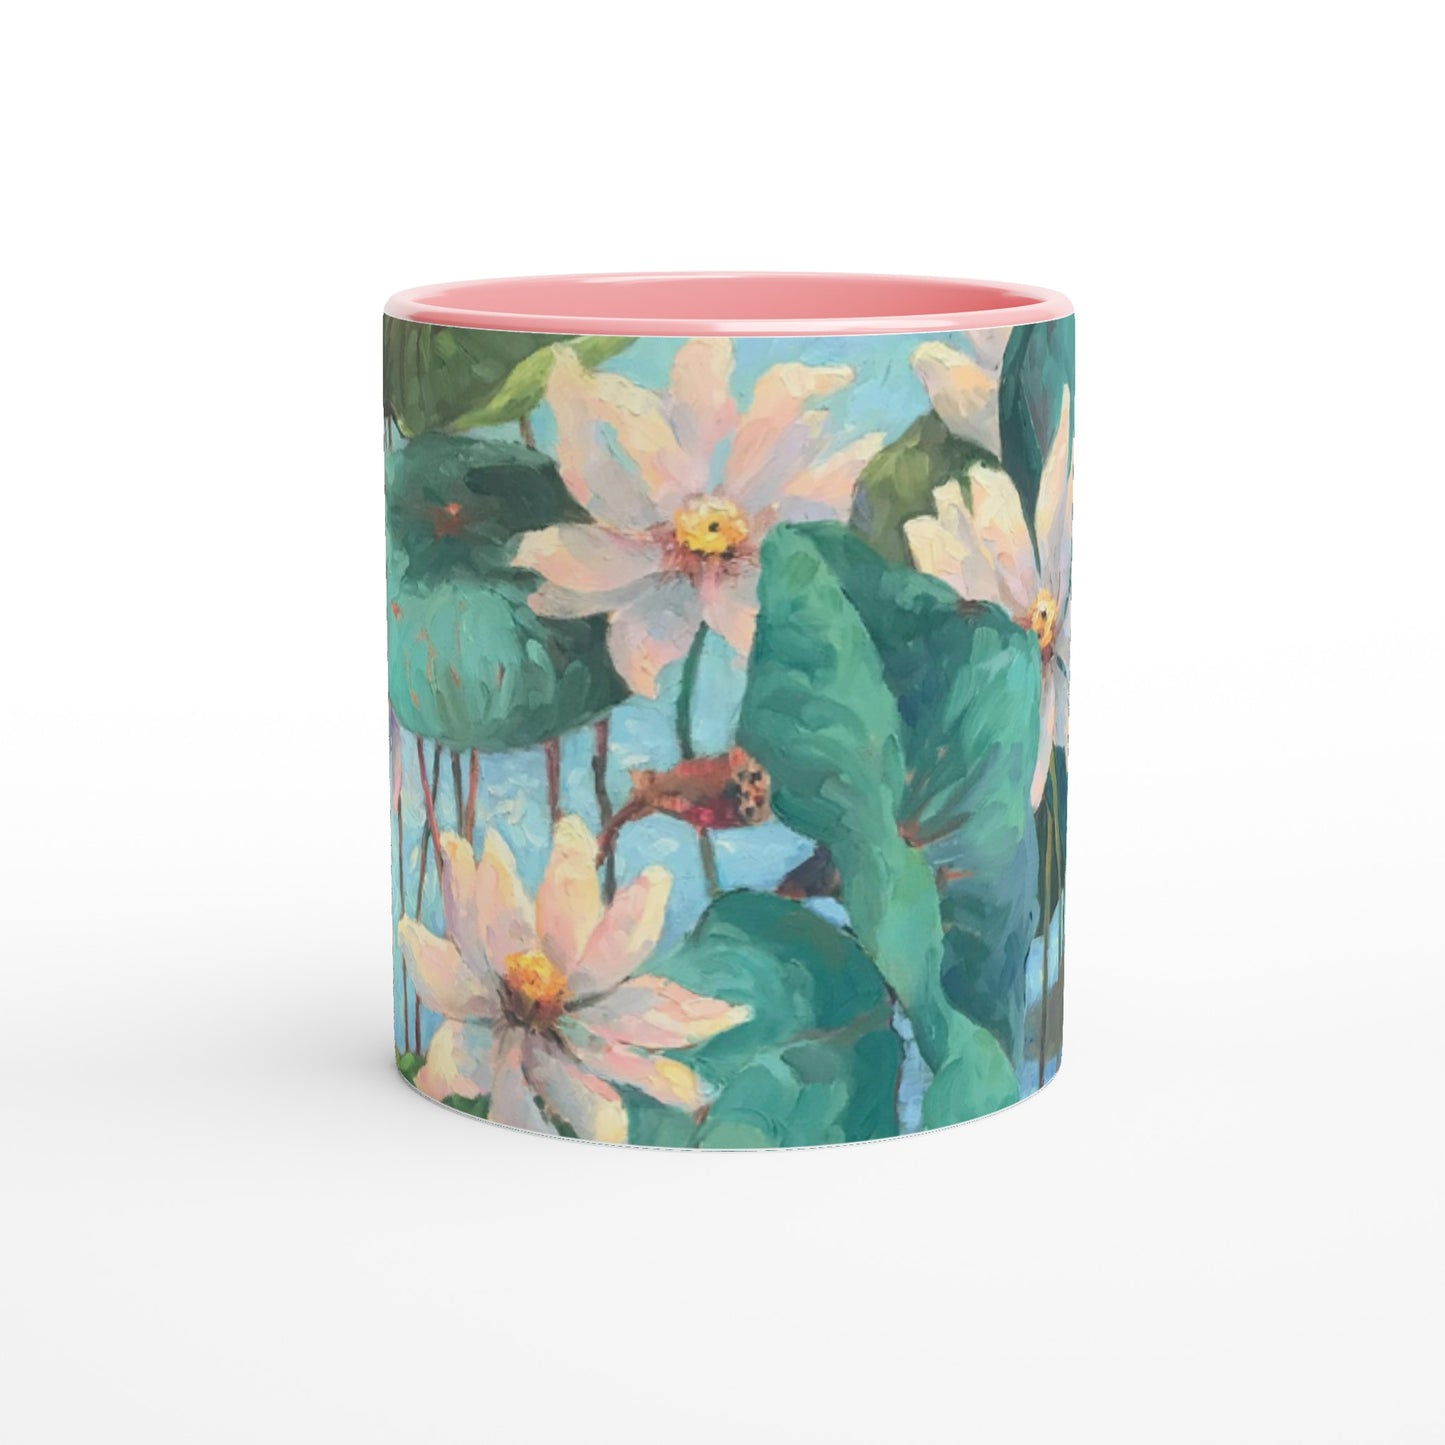 "Lily Pads" Floral White 11oz Ceramic Mug with Color Inside by Barbara Cleary Designs